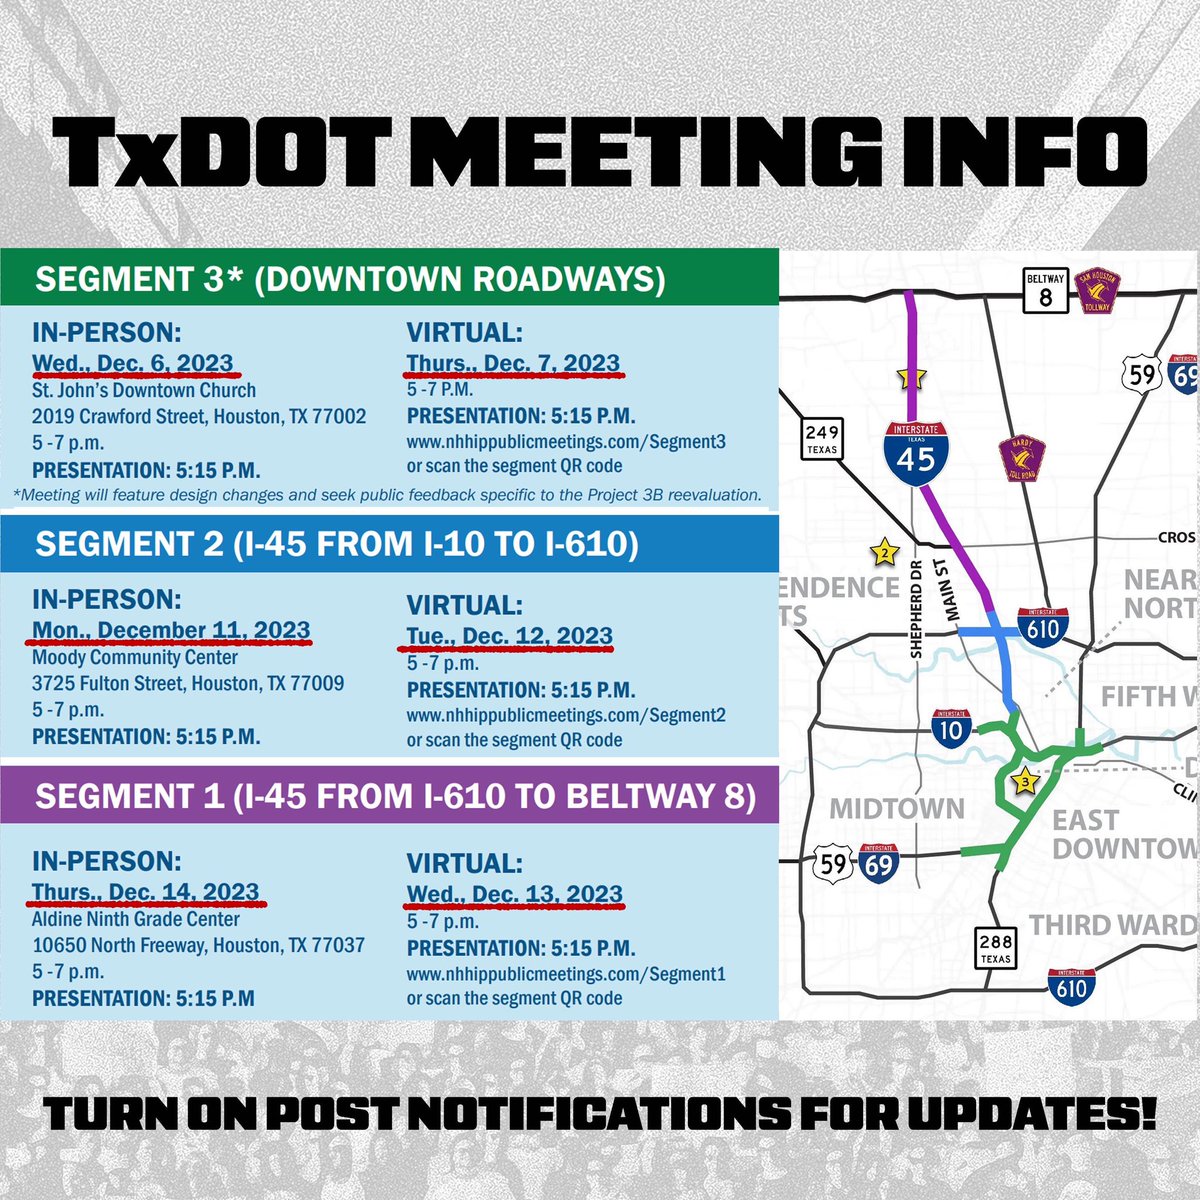 📢 HELLO HOUSTON‼️ we’re organizing a public teach-in about the I-45 expansion, its impacts, and how to fight it in light of the TxDOT public meetings that are starting next week. This event is open to everyone! Bring your friends, and together we can fight for a better Houston!